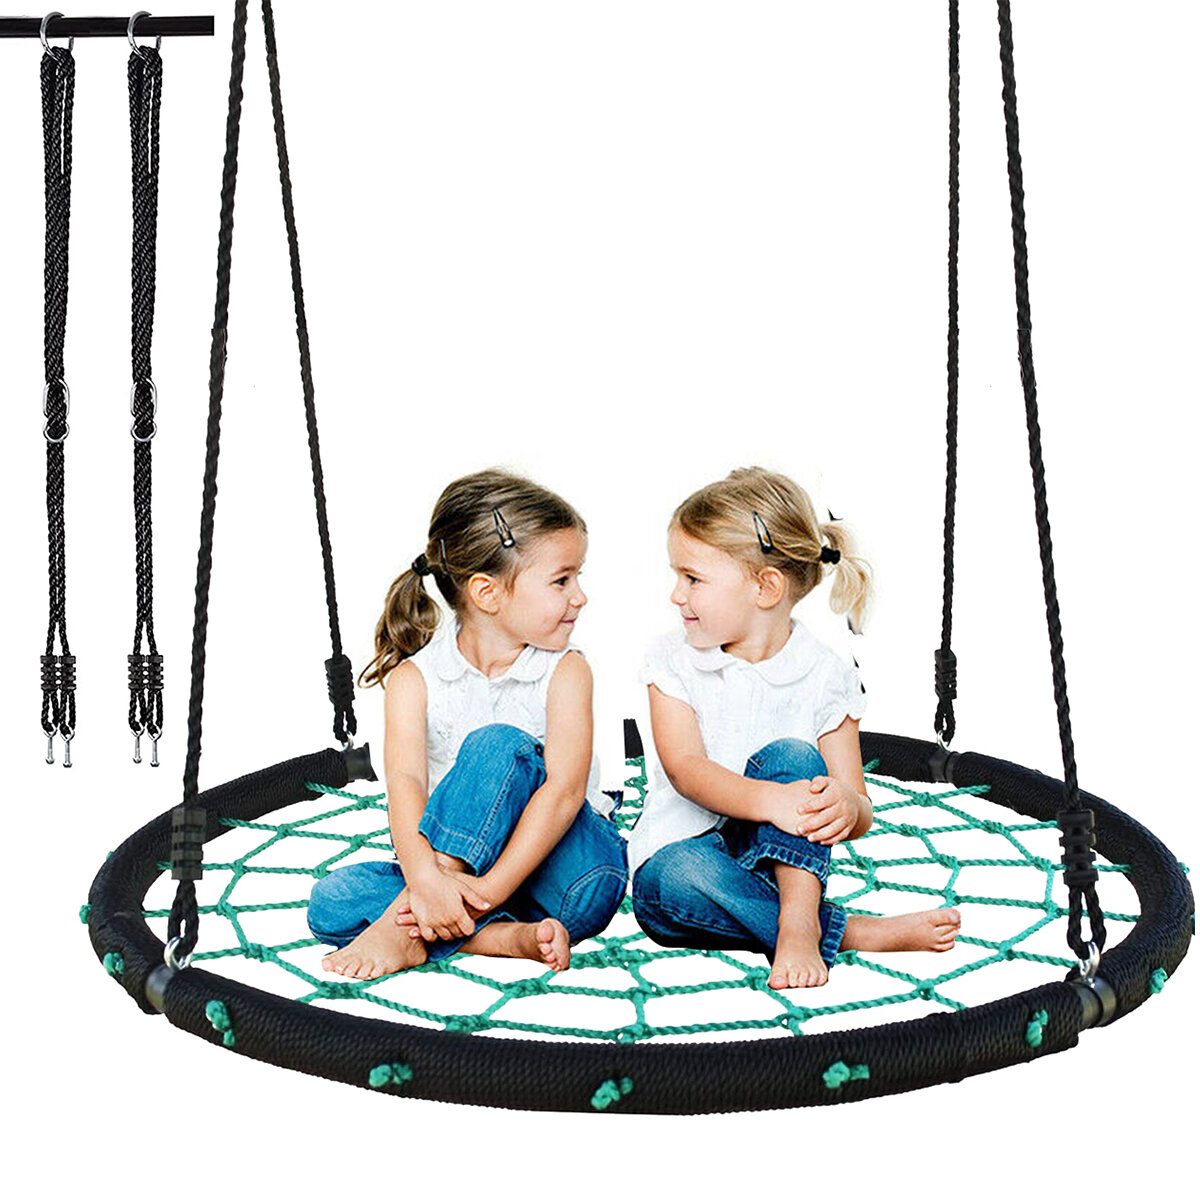 Image of 40/43 Inch Swing Outdoor Children Entertainment Round Toy Swing Sturdy Garden Patio Swing Durable Hanging Chair